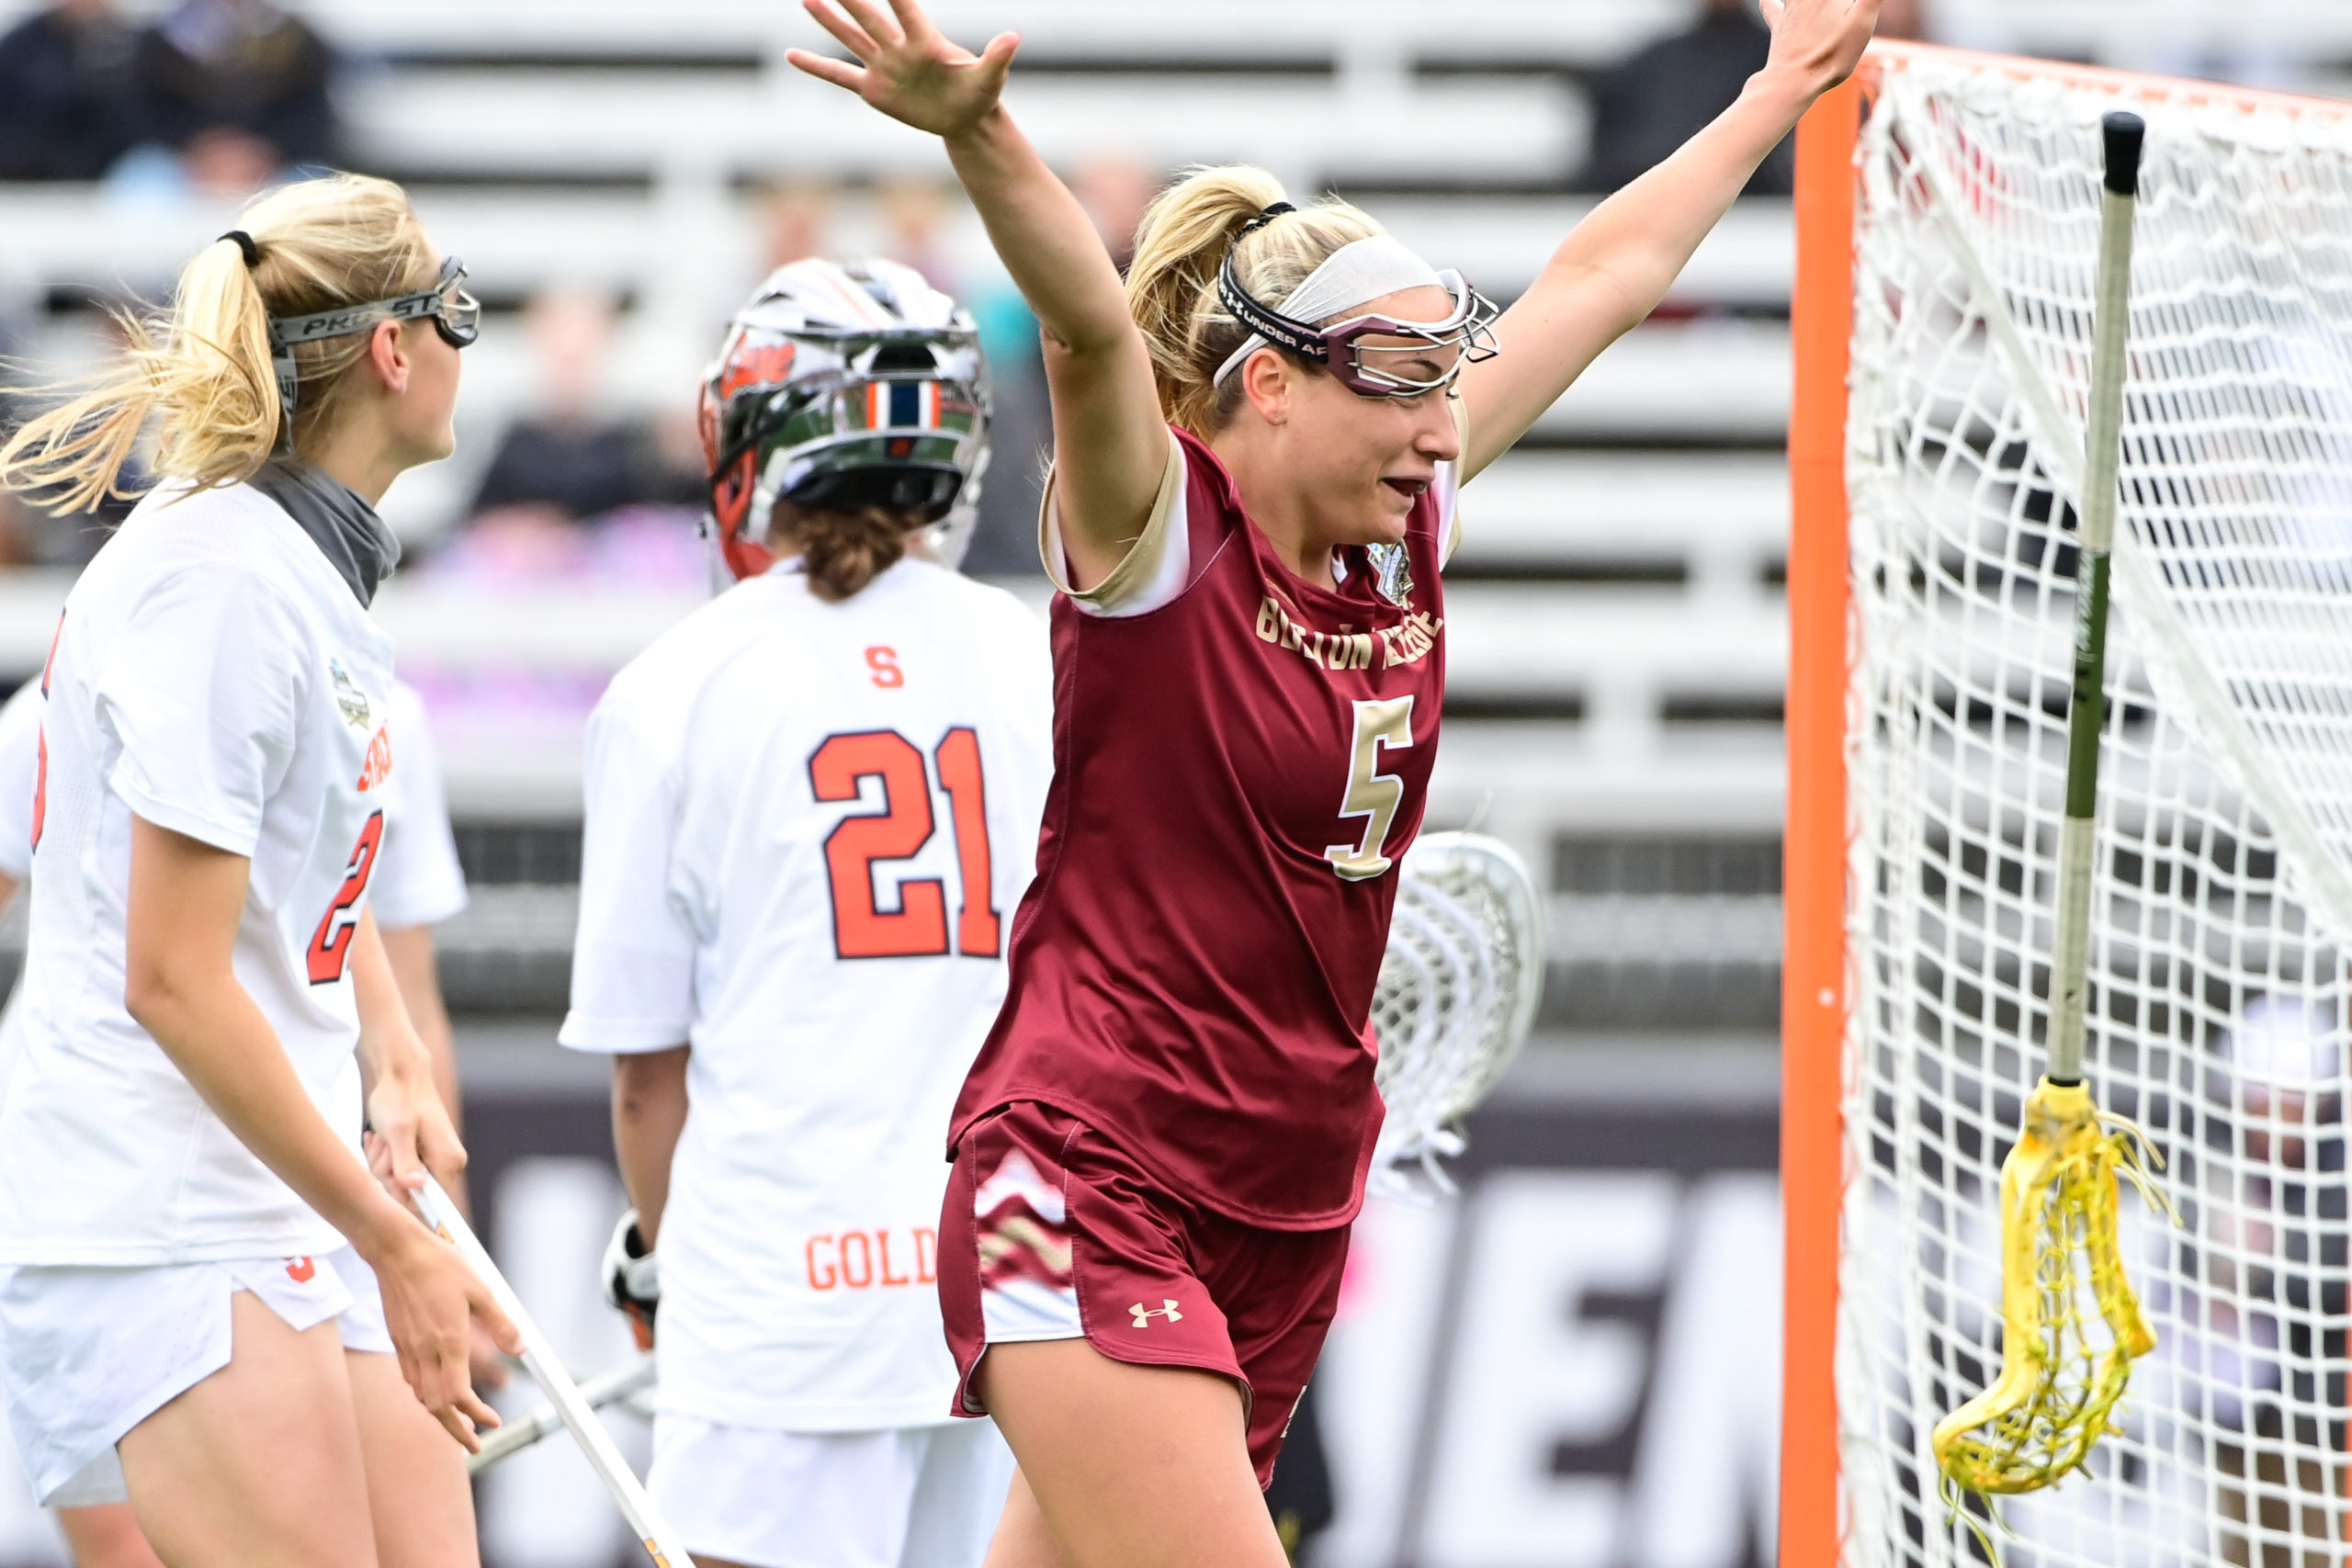 Belle Smith celebrates a goal which was featured on Sportscenter's Top 10 plays on Sunday.